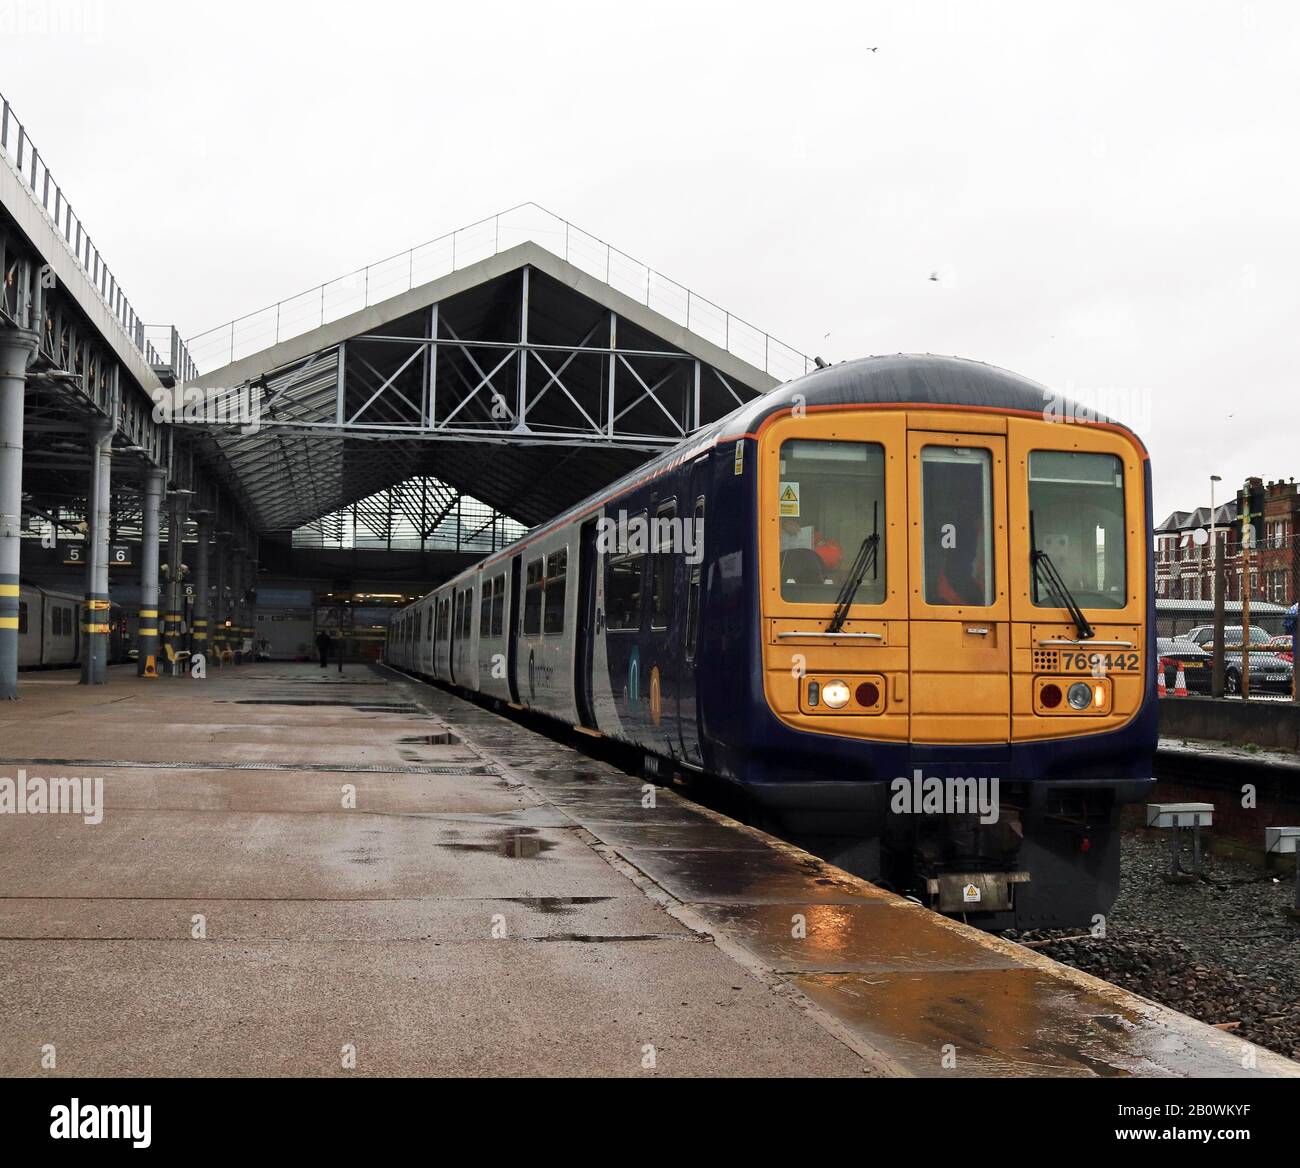 One of Northern’s “new” bi-mode trains stands in the rain at Southport during a test run from Southport to Wigan on 15.2.2020. Unit no 769 442. Stock Photo